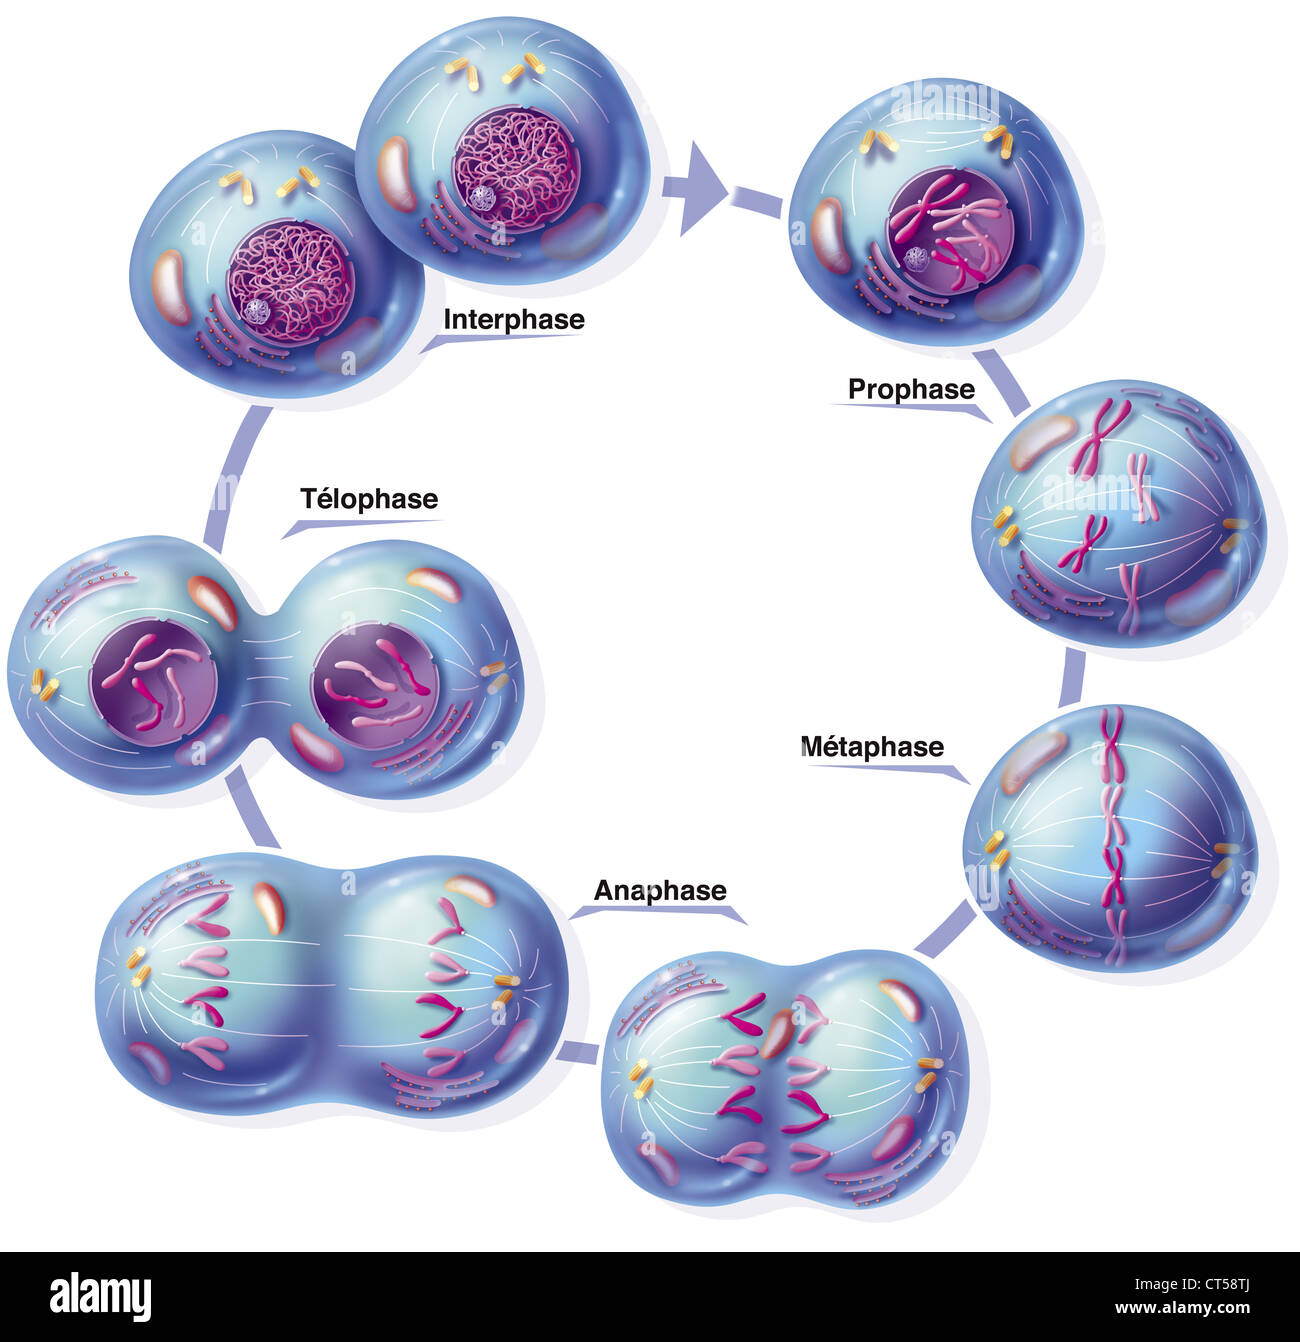 mitosis unlabeled diagram